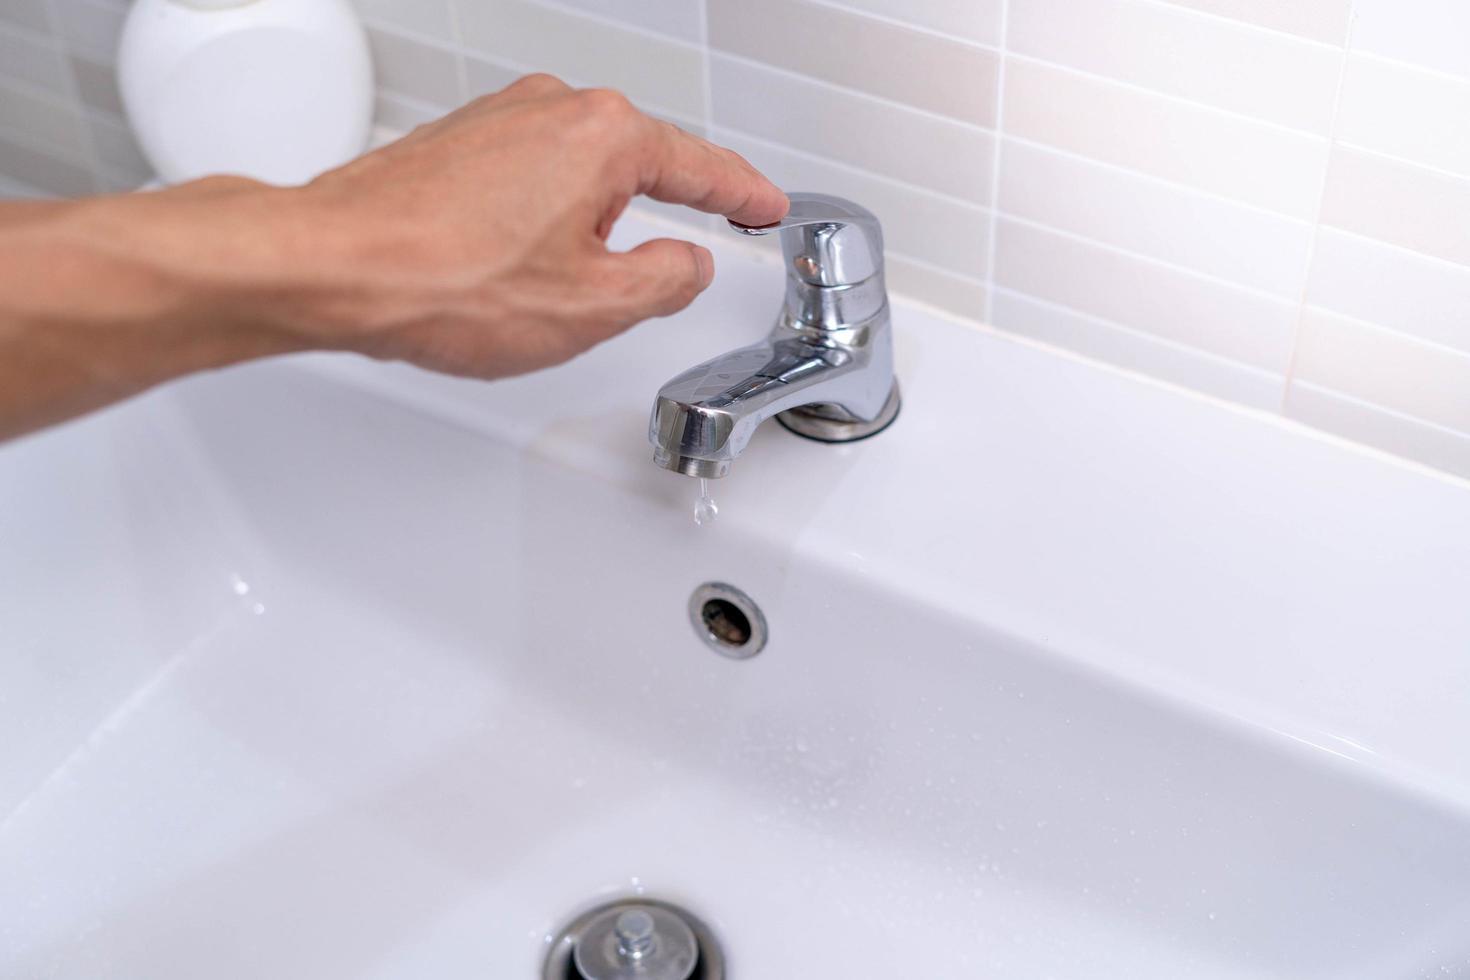 The faucet in the bathroom with running water. Man keeps turning off the water to save water energy and protect the environment. save water concept photo